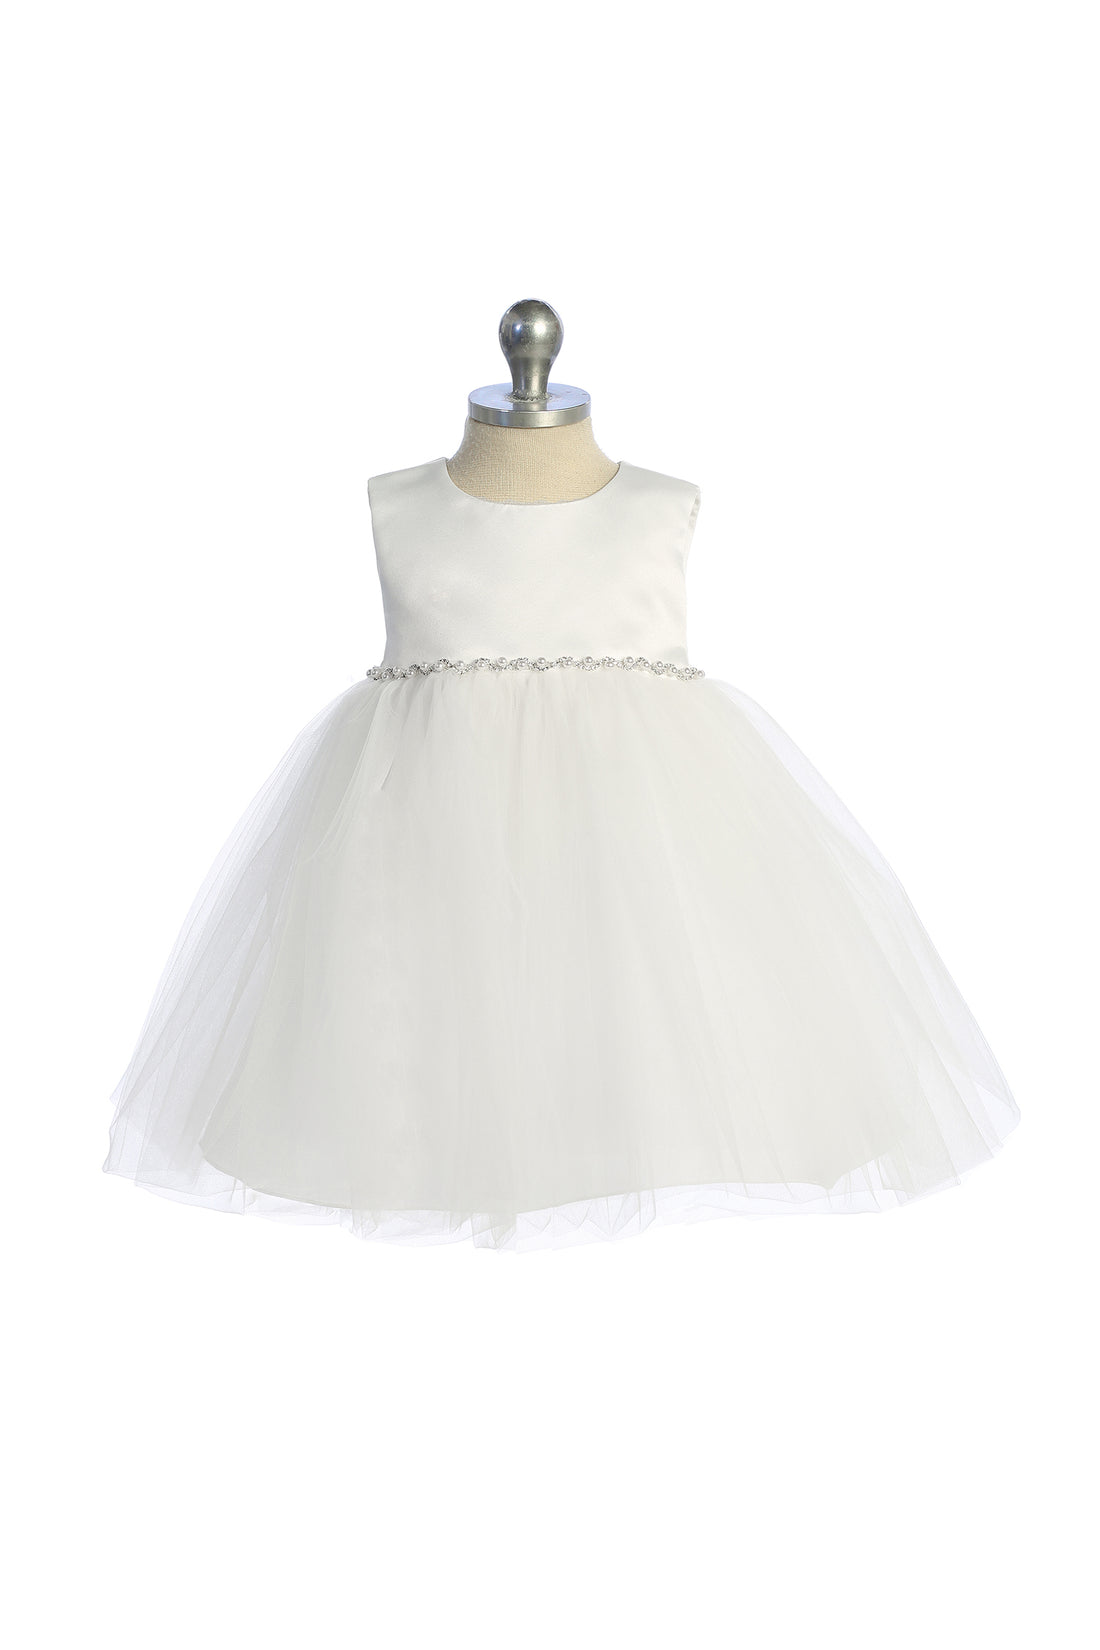 Baby Girl Satin with Rhinestones Party Dress- AS540-G Kids Dream